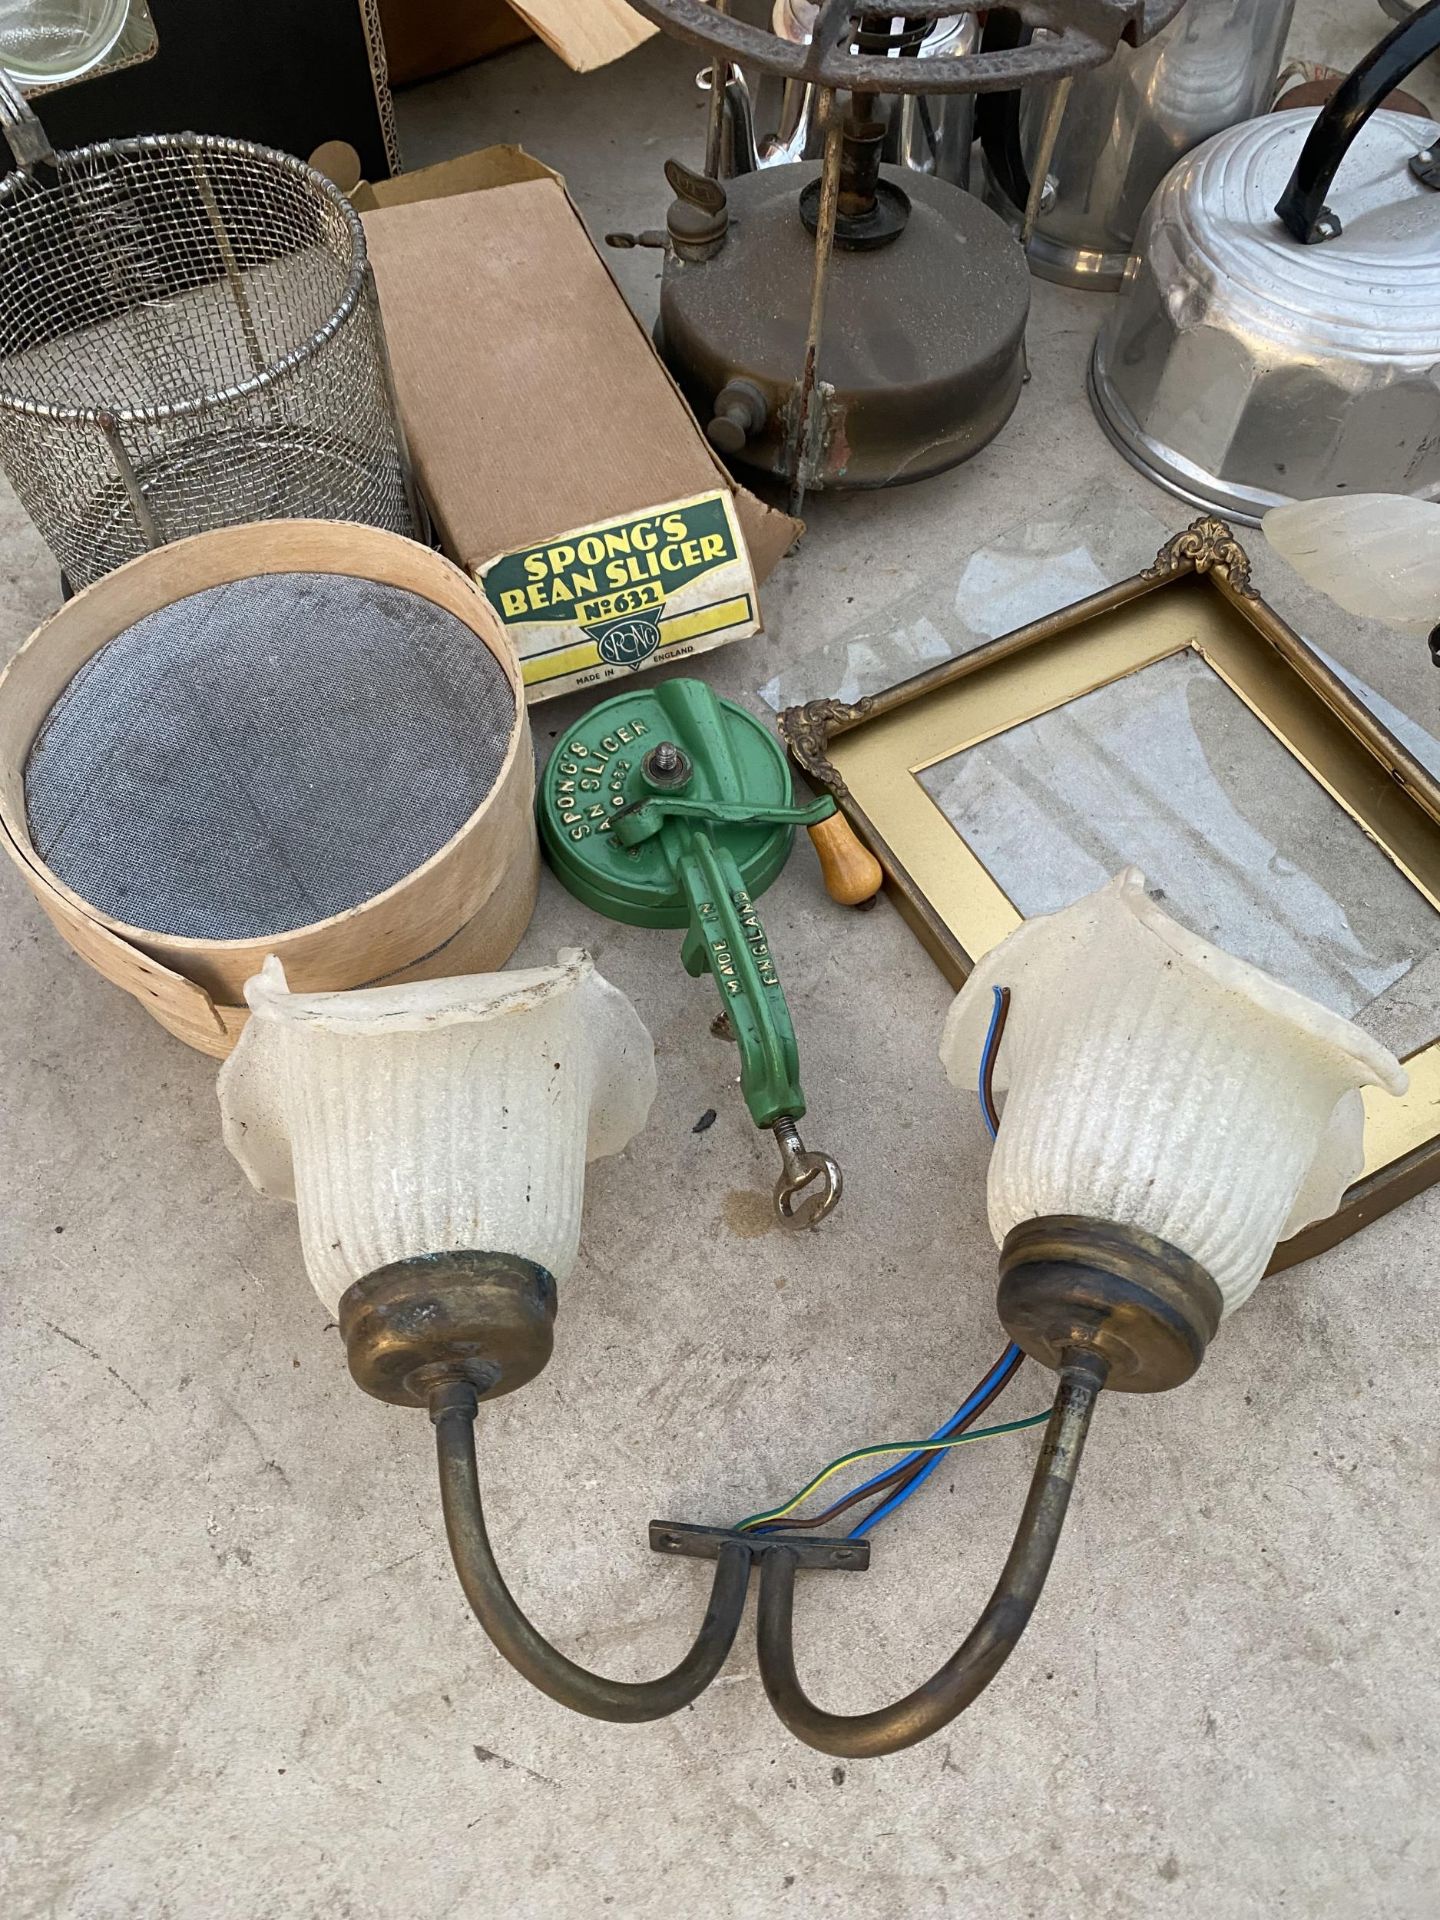 AN ASSORTMENT OF ITEMS TO INCLIUDE A VINTAGE BEAN SLICER, A VINTAGE CAMPING CSTOVE AND A PARAFIN - Image 2 of 4